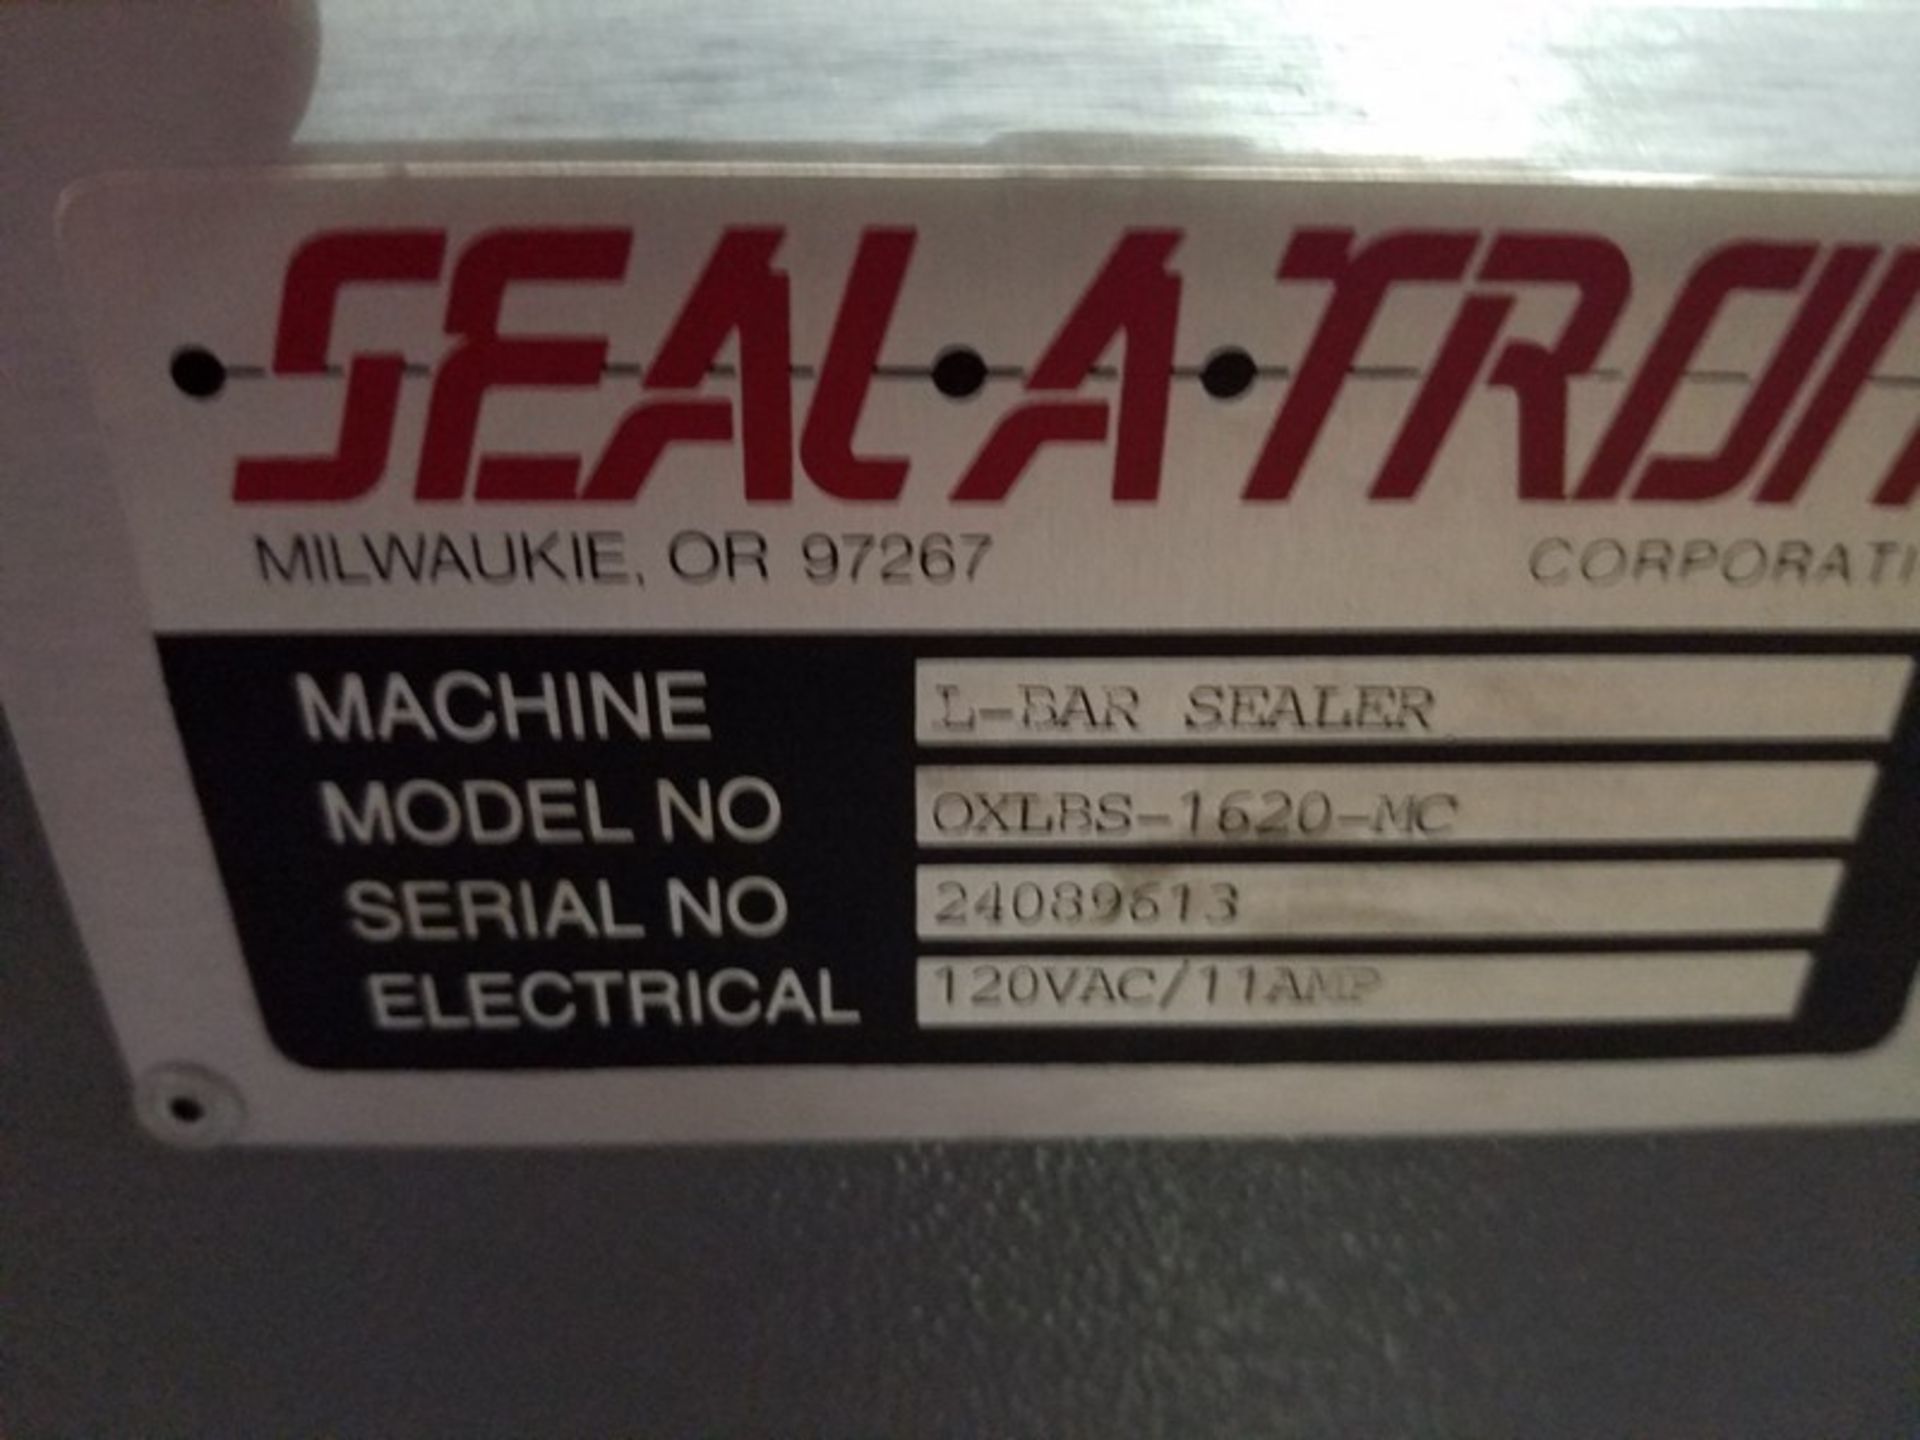 Seal-A-Tron L-Bar Sealer, M/N OXLBS-1620-MC, S/N 24089613, 120 VAC/11AMP (LOCATED IN FT. WORTH, - Image 5 of 5